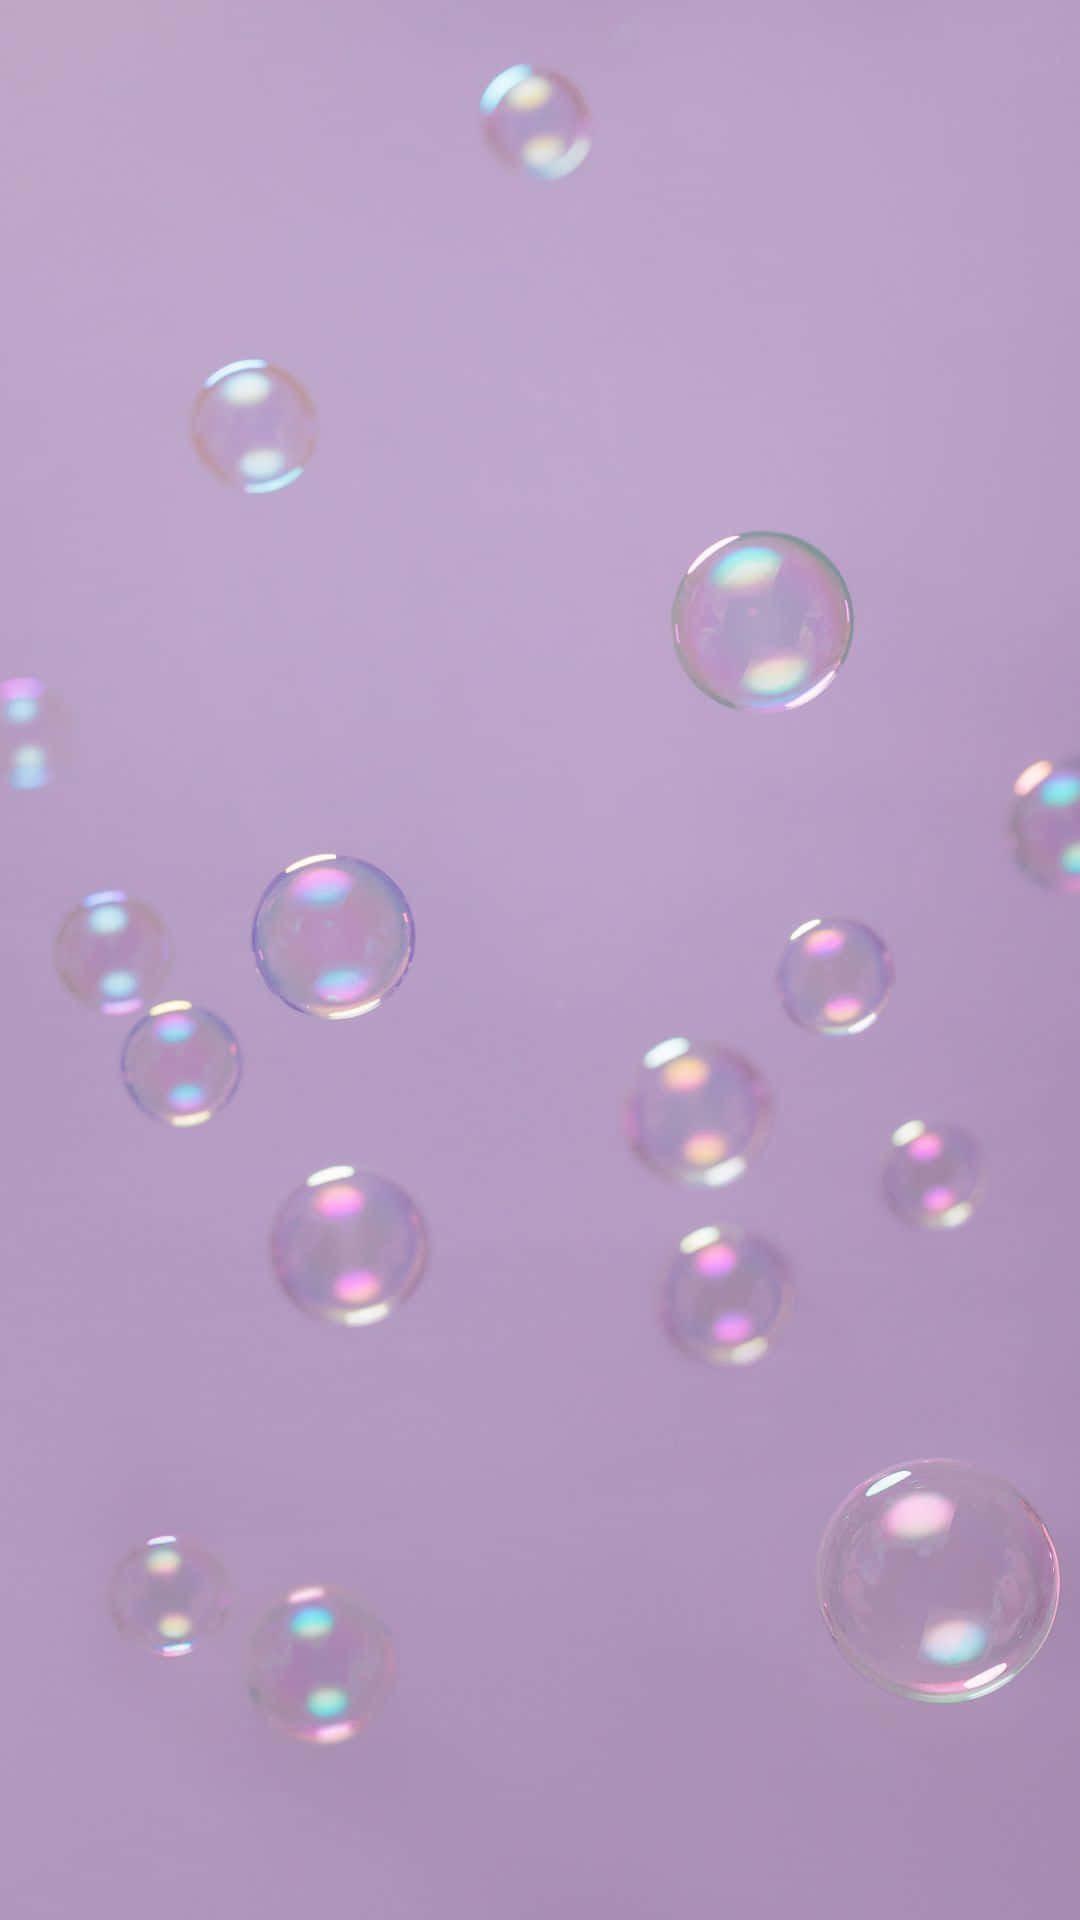 Get Stylish with Bubbles Phone Wallpaper